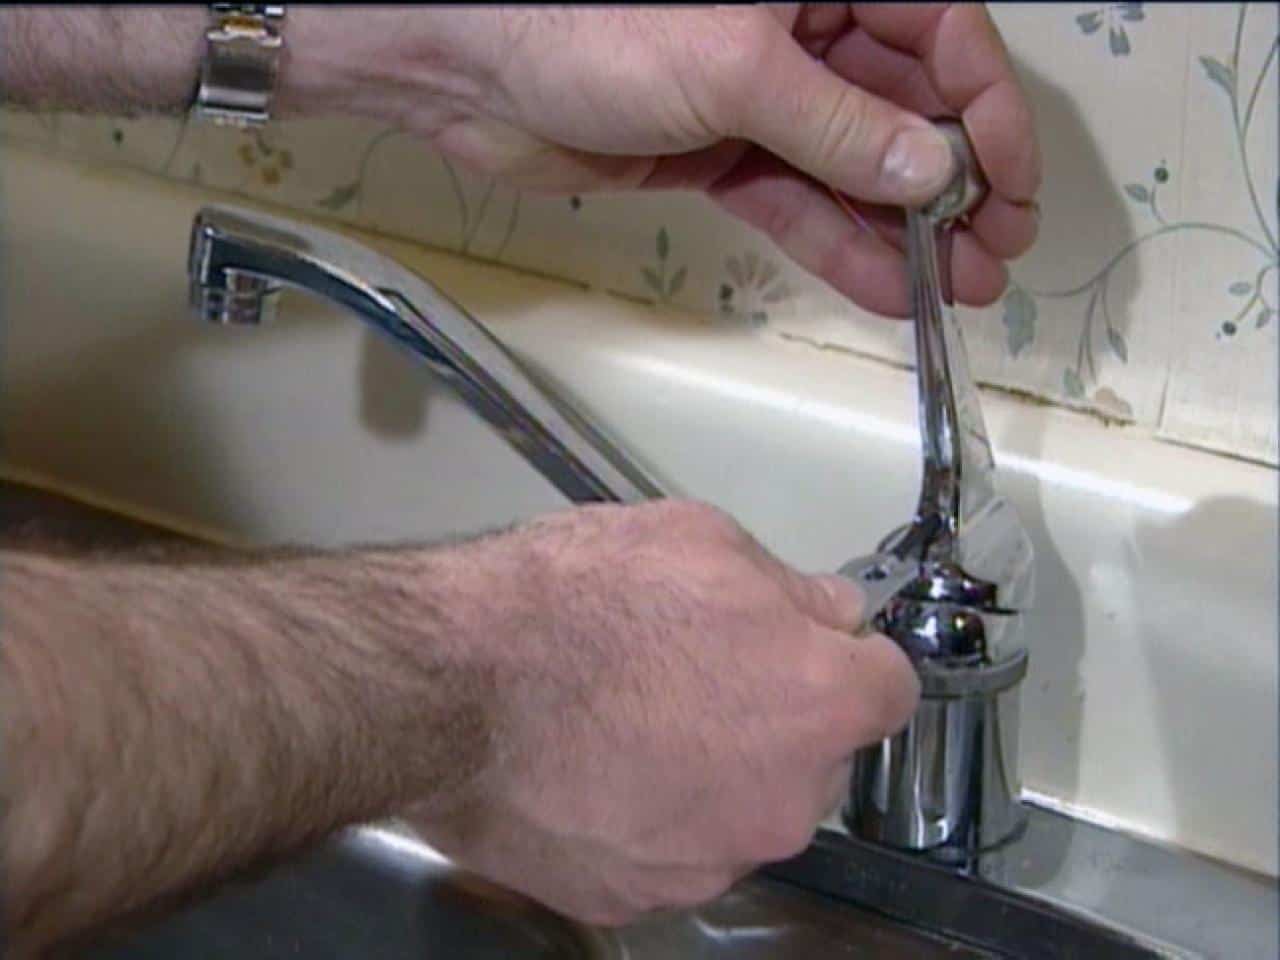 How To Repair A Faucet? – The Housing Forum